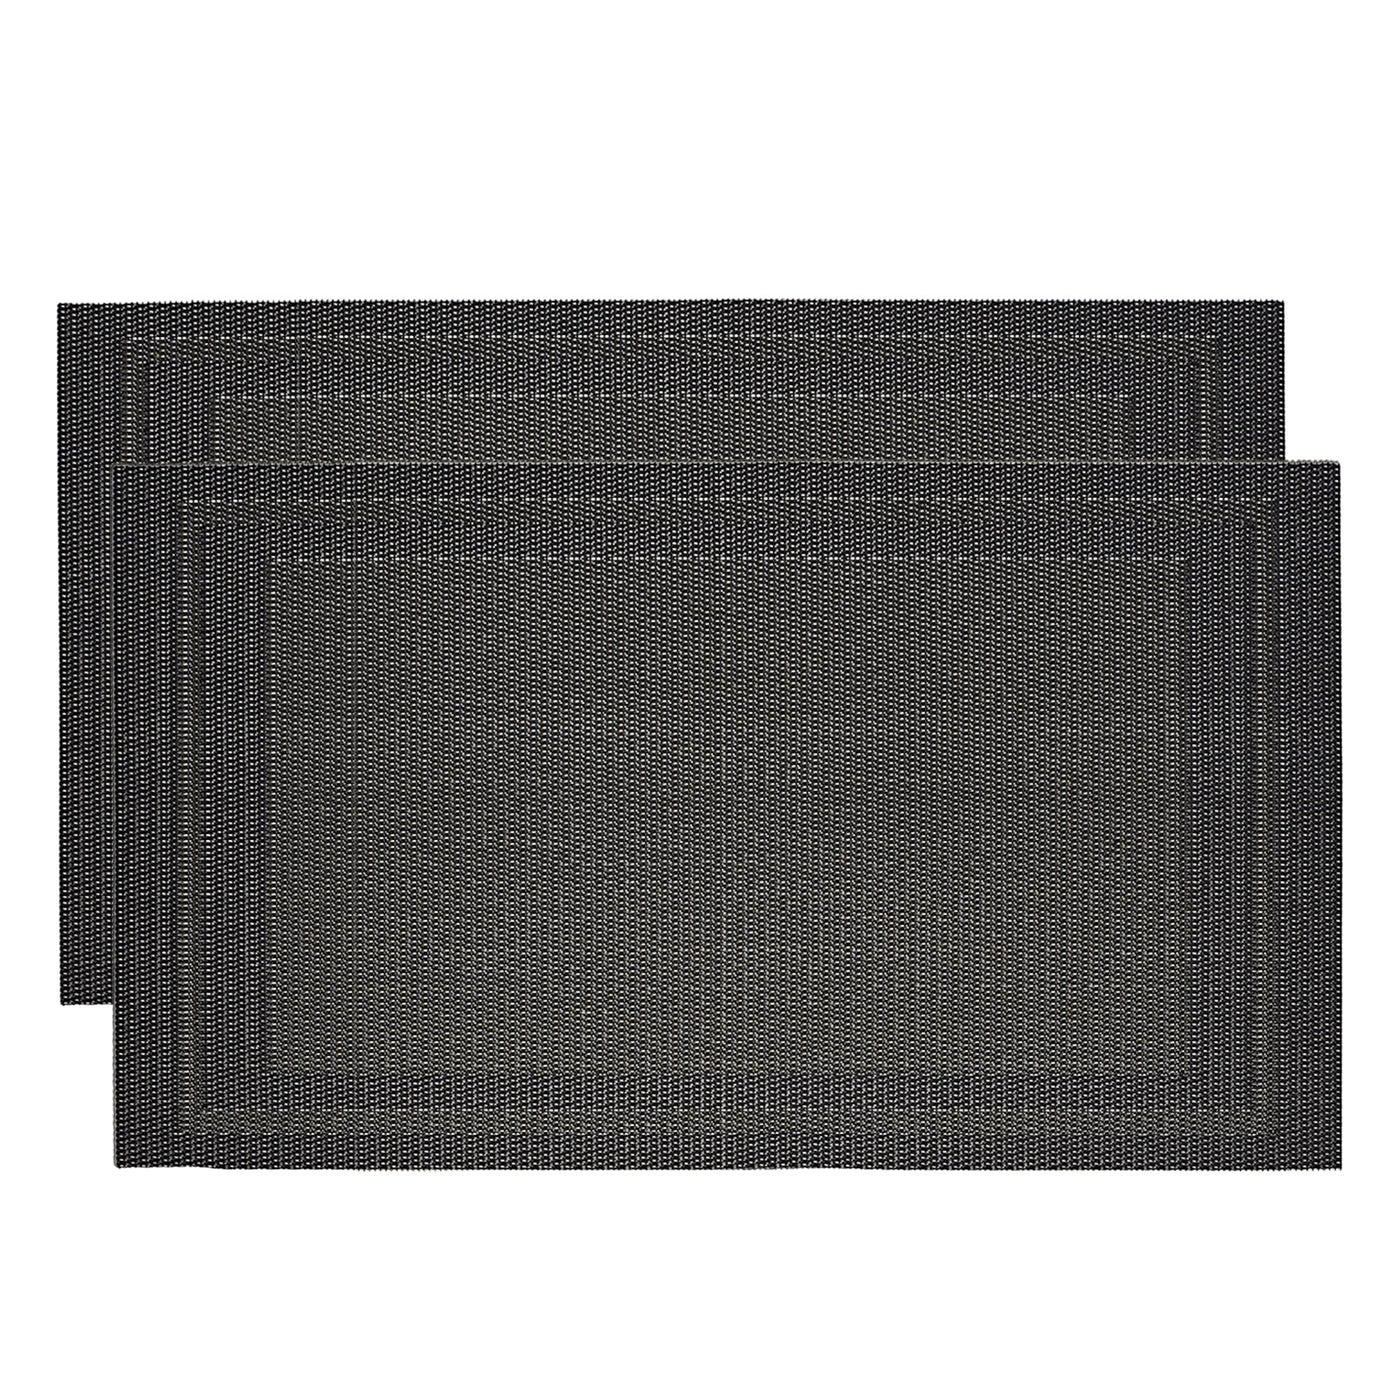 uxcell Uxcell Place Mats, 450x300mm Table Mats Set of 2 PVC Washable Woven Placemat Dark Gray